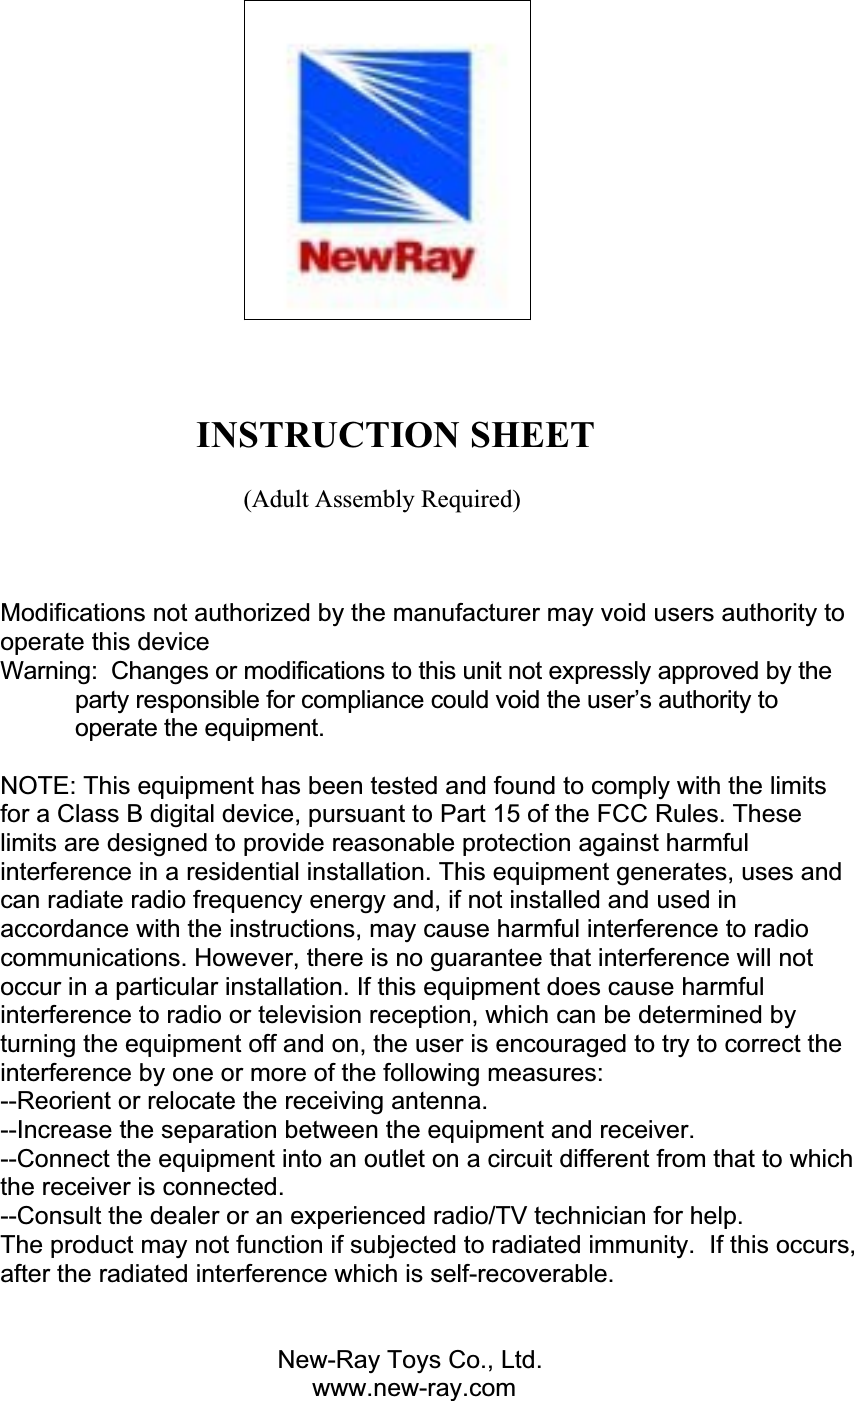                      INSTRUCTION SHEET                                        (Adult Assembly Required) Modifications not authorized by the manufacturer may void users authority to operate this device Warning:  Changes or modifications to this unit not expressly approved by the party responsible for compliance could void the user’s authority to operate the equipment. NOTE: This equipment has been tested and found to comply with the limits for a Class B digital device, pursuant to Part 15 of the FCC Rules. These limits are designed to provide reasonable protection against harmful interference in a residential installation. This equipment generates, uses and can radiate radio frequency energy and, if not installed and used in accordance with the instructions, may cause harmful interference to radio communications. However, there is no guarantee that interference will not occur in a particular installation. If this equipment does cause harmful interference to radio or television reception, which can be determined by turning the equipment off and on, the user is encouraged to try to correct the interference by one or more of the following measures: --Reorient or relocate the receiving antenna. --Increase the separation between the equipment and receiver. --Connect the equipment into an outlet on a circuit different from that to which the receiver is connected. --Consult the dealer or an experienced radio/TV technician for help. The product may not function if subjected to radiated immunity.  If this occurs, after the radiated interference which is self-recoverable.  New-Ray Toys Co., Ltd.            www.new-ray.com 